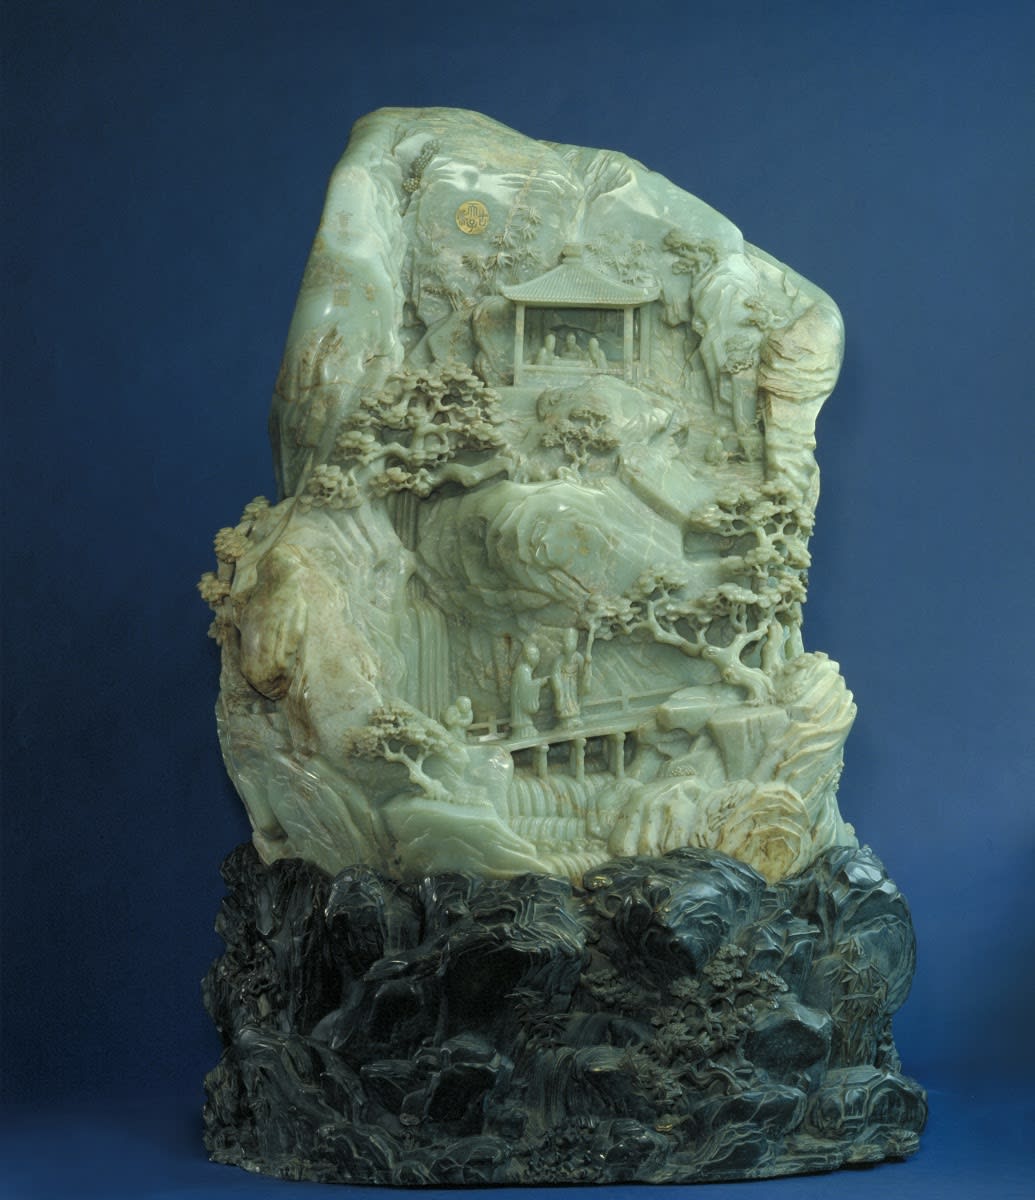 Jade sculpture of the nine elders of Huichang depicting the story of the fifth year of the Huichang reign of the Tang dynasty in which Bai Juyi and eight other famous literati held a banquet at Mount Xiang. 1786 CE, Qianlong reign, now on display at the Palace Museum in Beijing